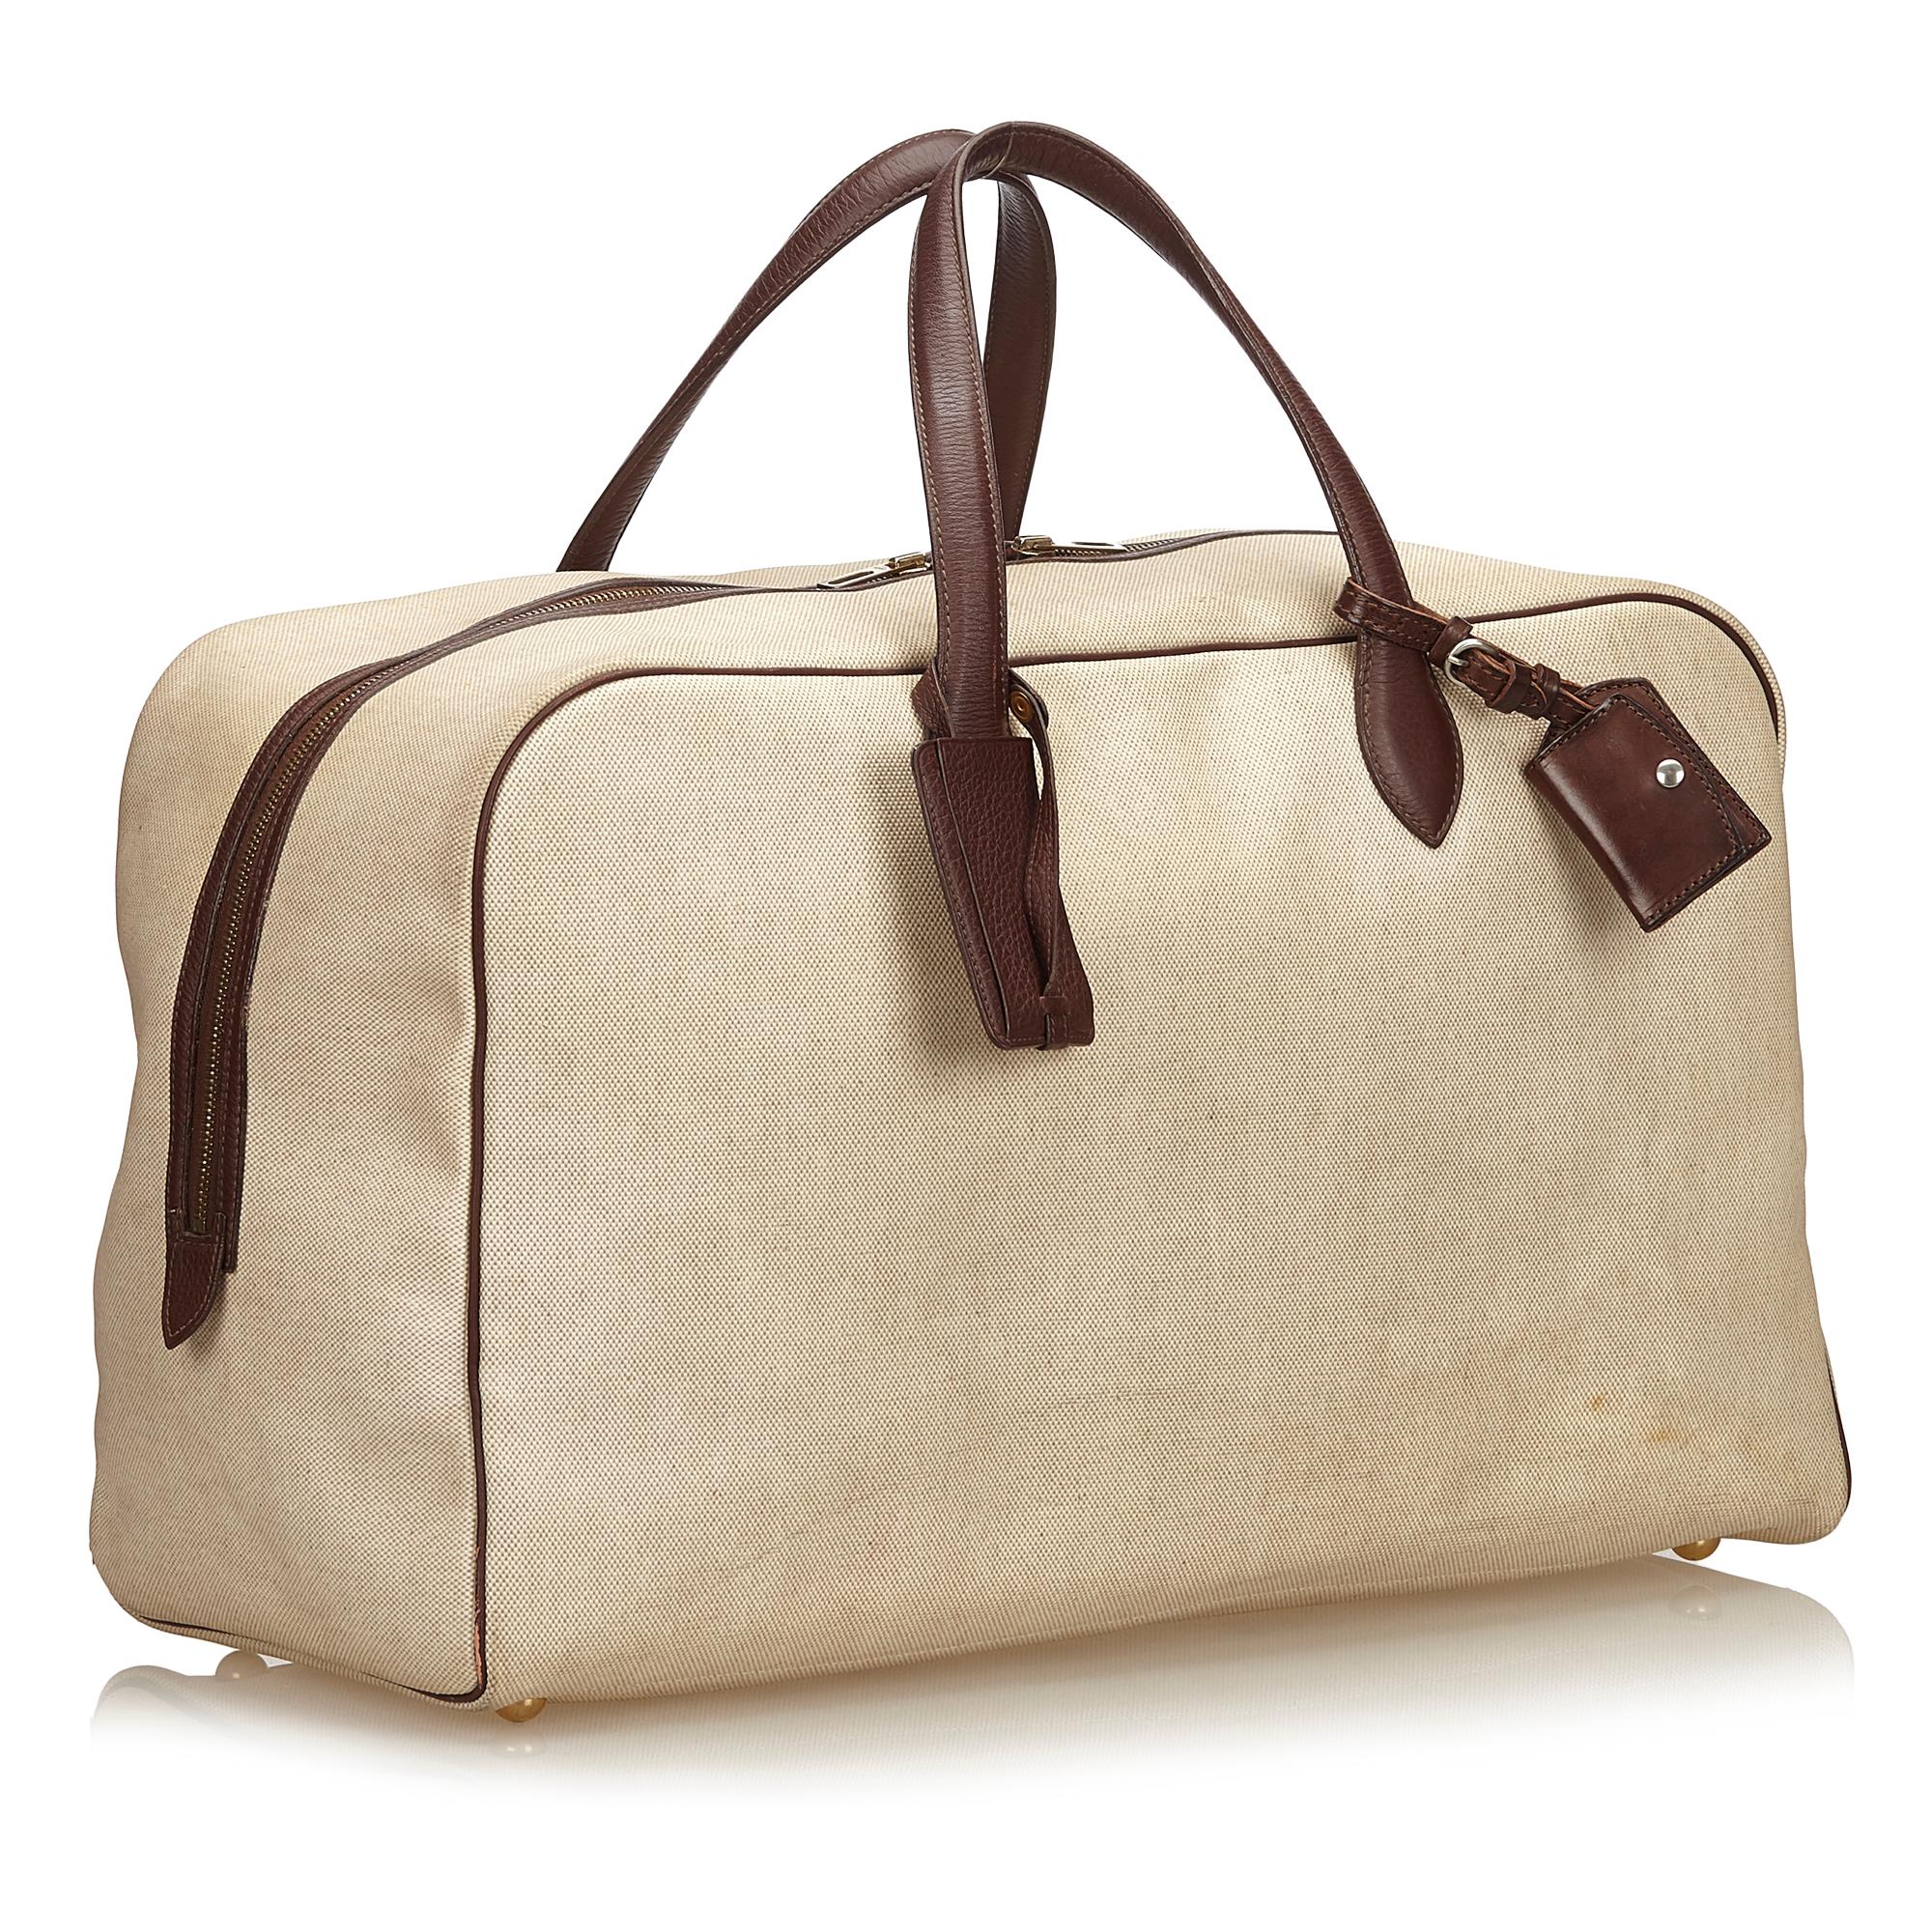 The Victoria 50 features a canvas body, flat straps, and top zip closure. It carries as B condition rating.

Inclusions: 
This item does not come with inclusions.

Dimensions:
Length: 29.00 cm
Width: 50.00 cm
Depth: 22.00 cm

Material: Fabric x